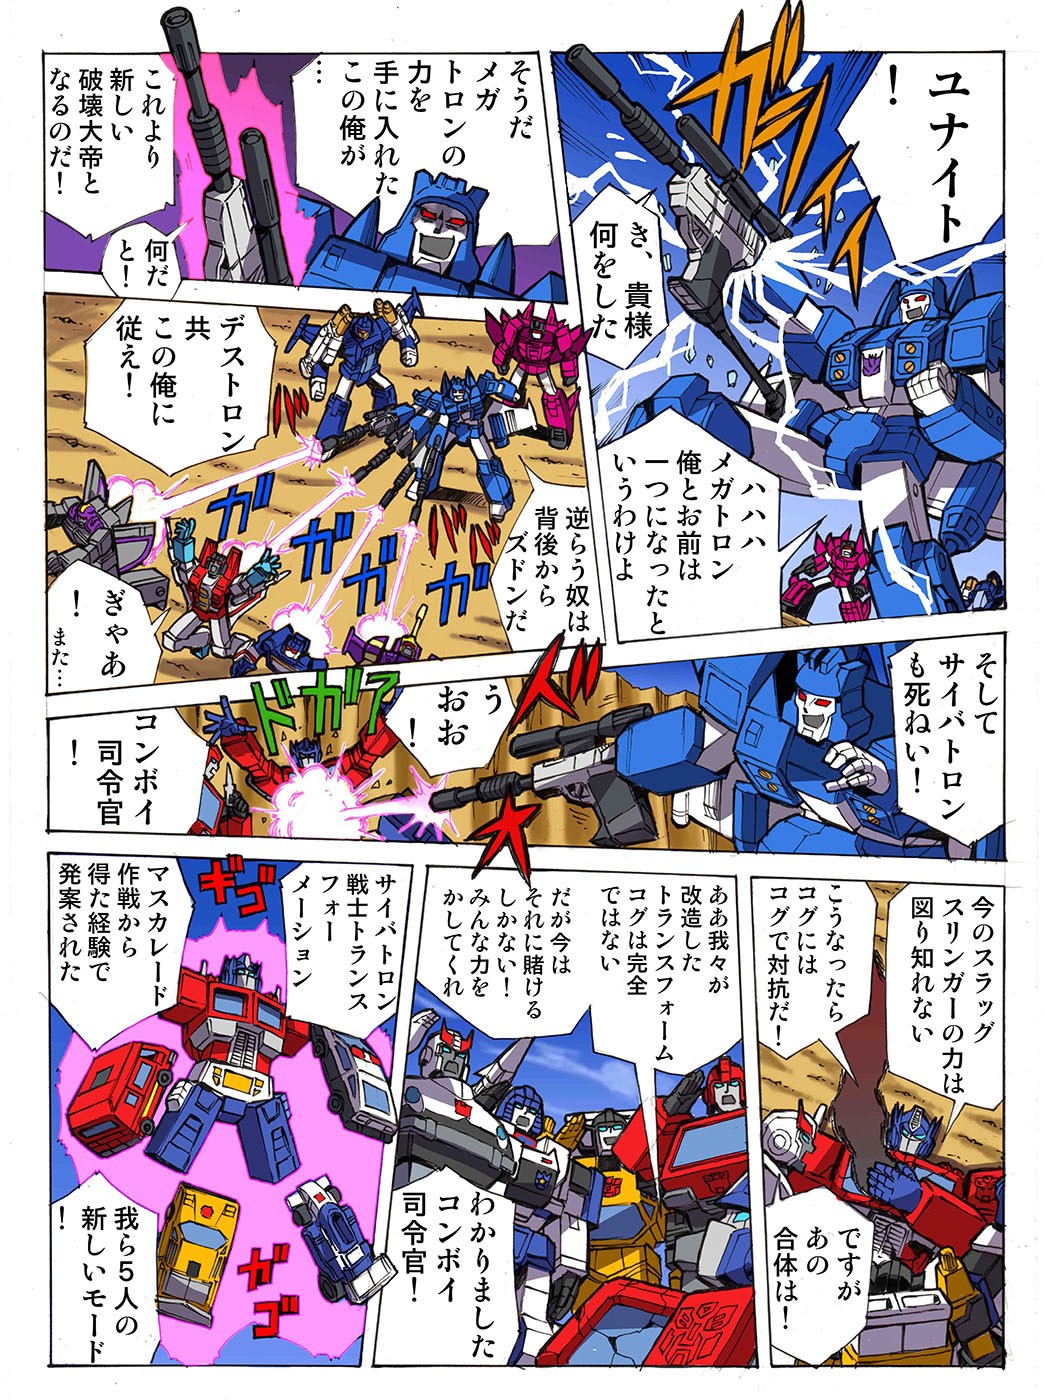 Transformers News: Chapter 49 of Takara Tomy Transformers Legends Manga Now Online